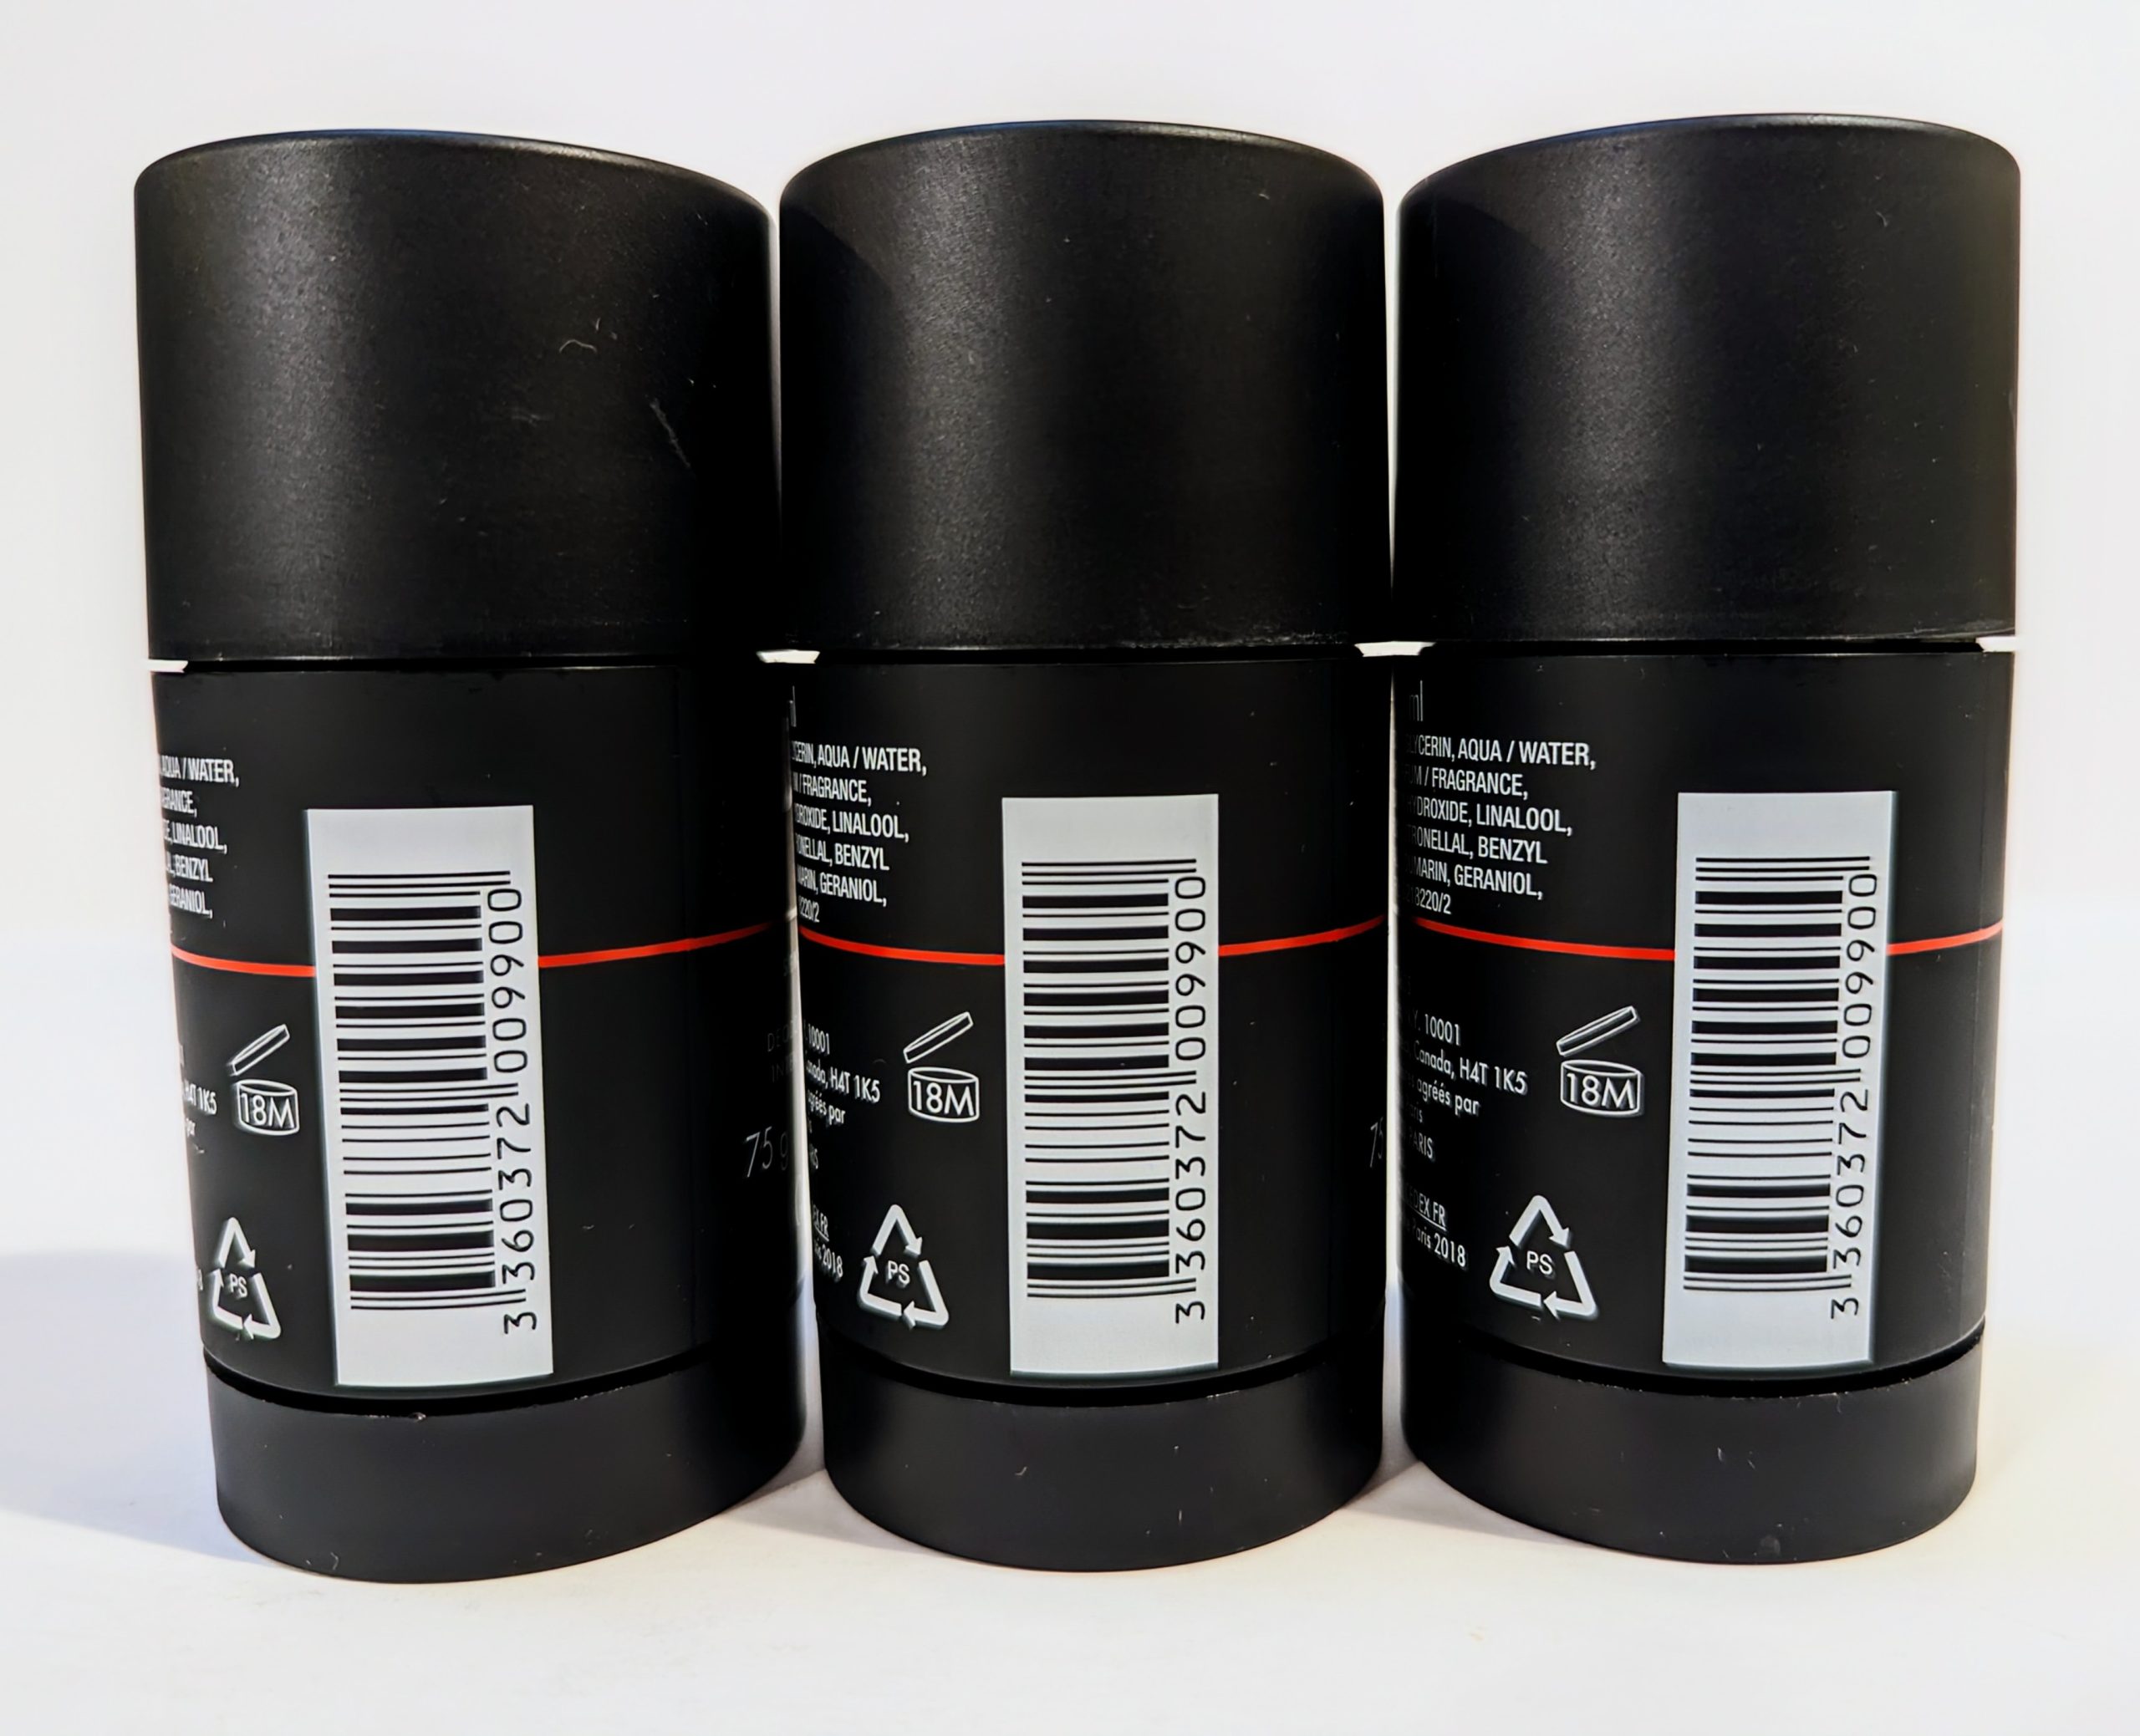 Three black deodorant bottles are shown in a row with barcodes, recycling, and ingredient information visible on the back labels.